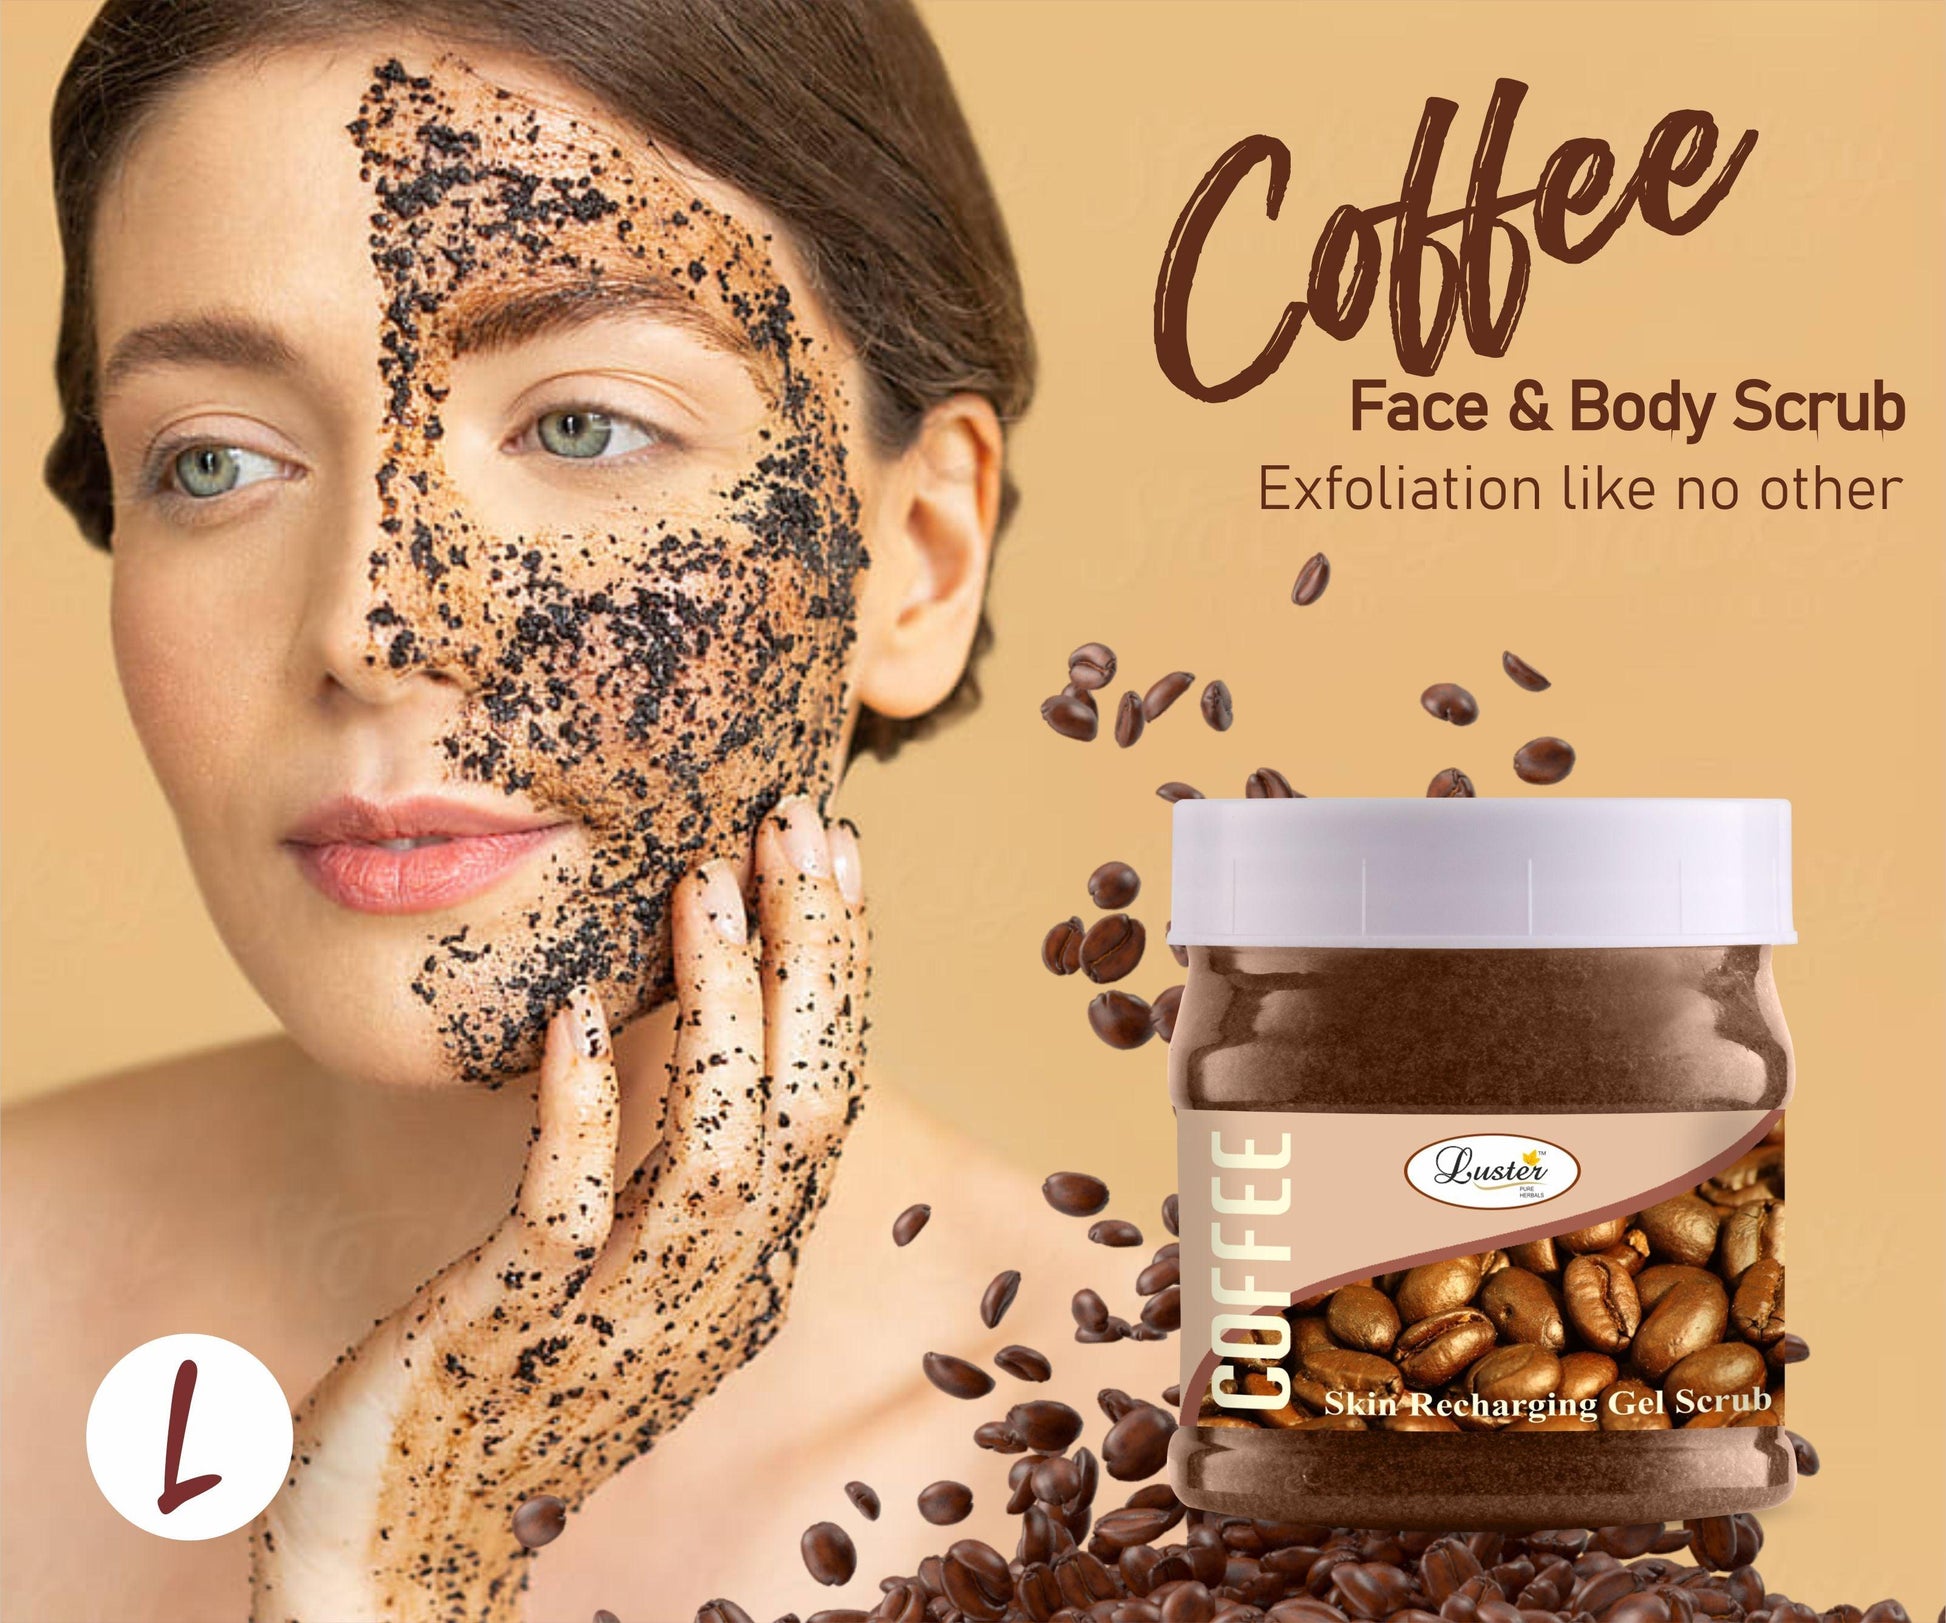 Luster Coffee Face & Body Scrub | Deeply Exfoliates | Removes Dead Skin Cells | Rejuvenates Skin | Provides Amazingly Glowing Skin | 500 ml - Image #1